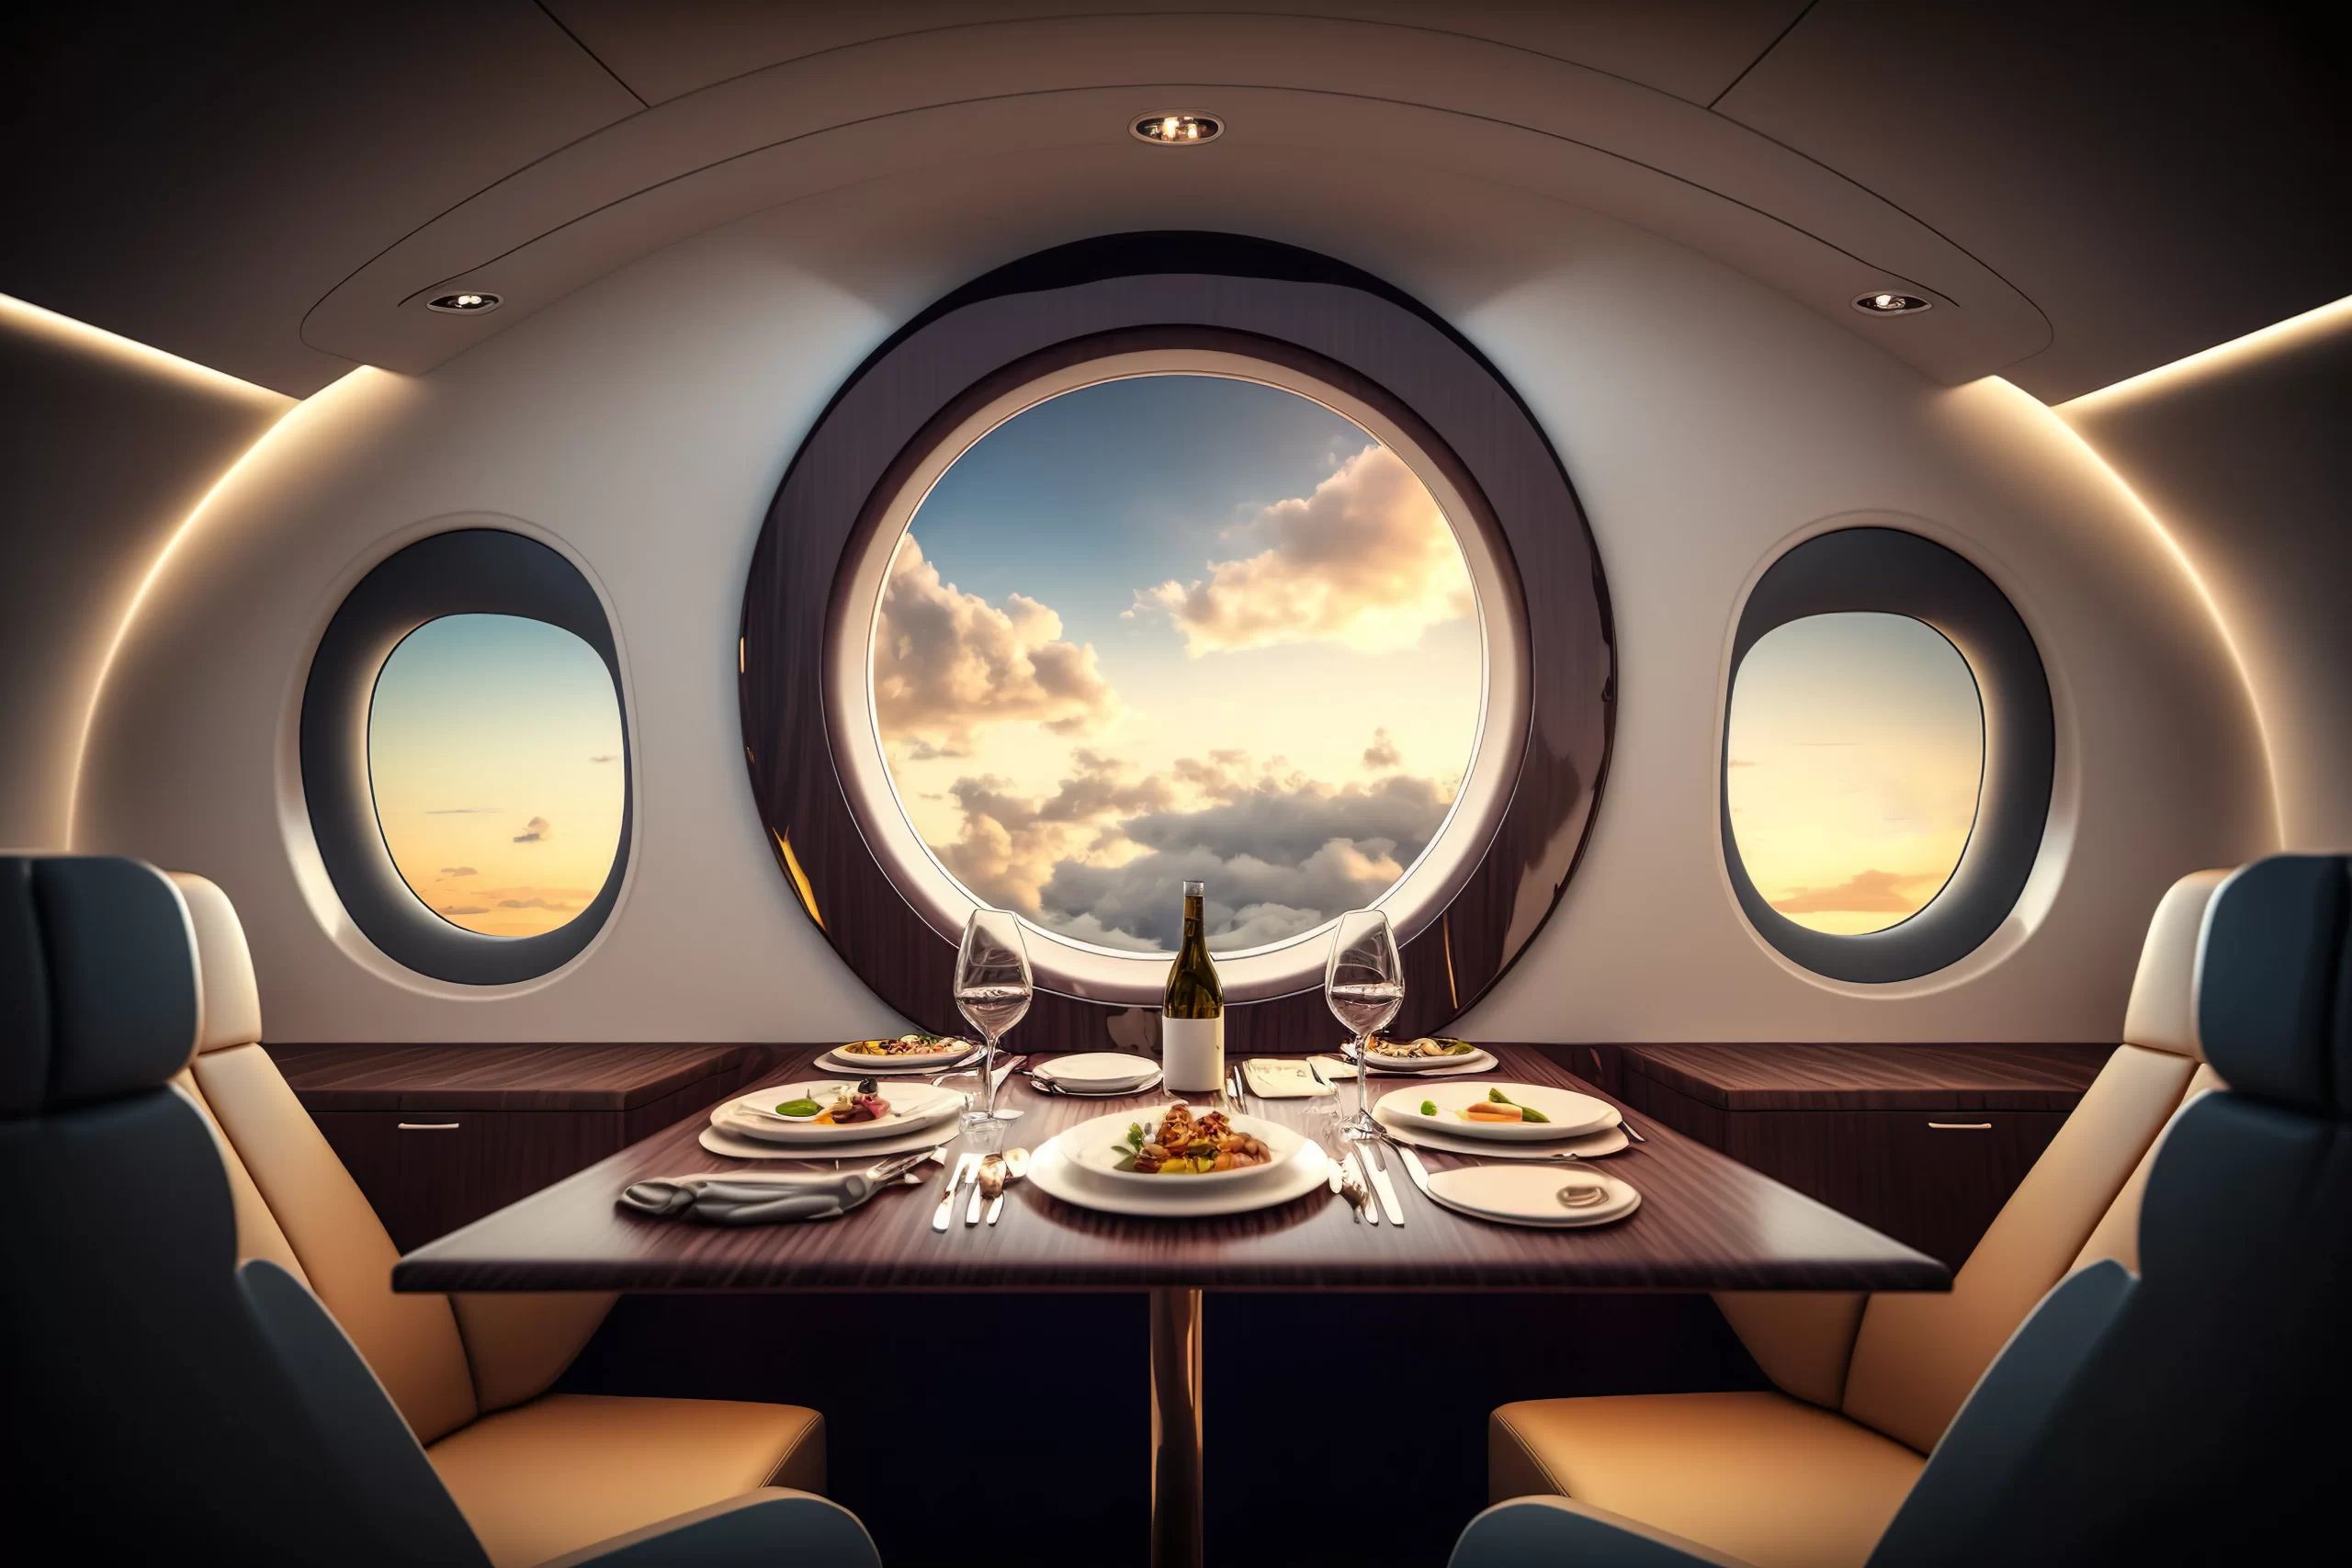 dinner on a private jet